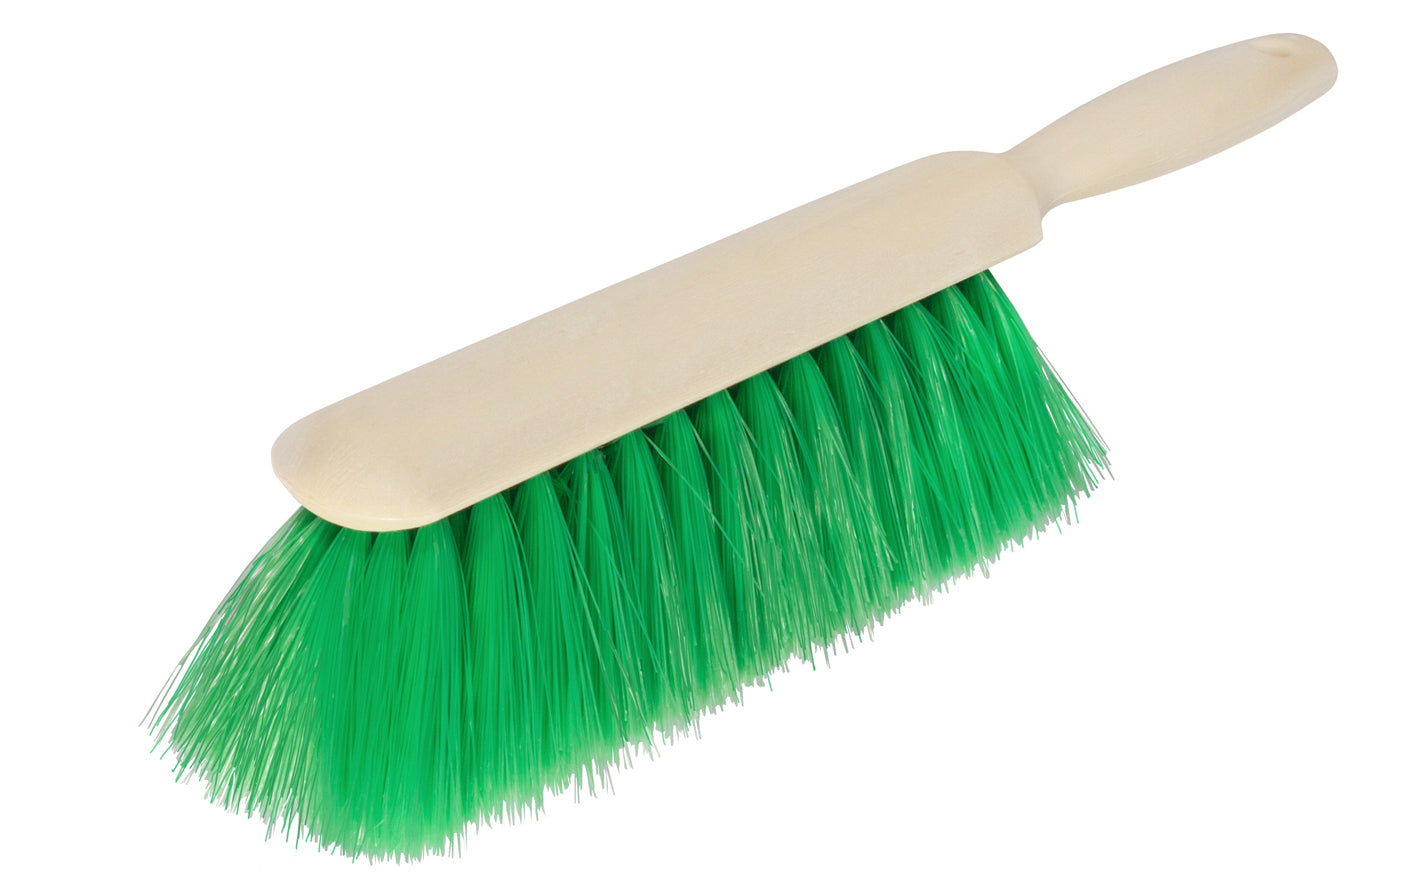 Bench Brush ~ Green Nylex Bristles - Magnolia Counter Duster Model No. 57 ~ Well-made duster ~ Green flagged nylex bristles ~ Bristles are staple set in hard plastic handle ~ Soft synthetic bristles ~  Excellent for general purpose dusting, cleaning counters, & the workshop area ~ Made in USA